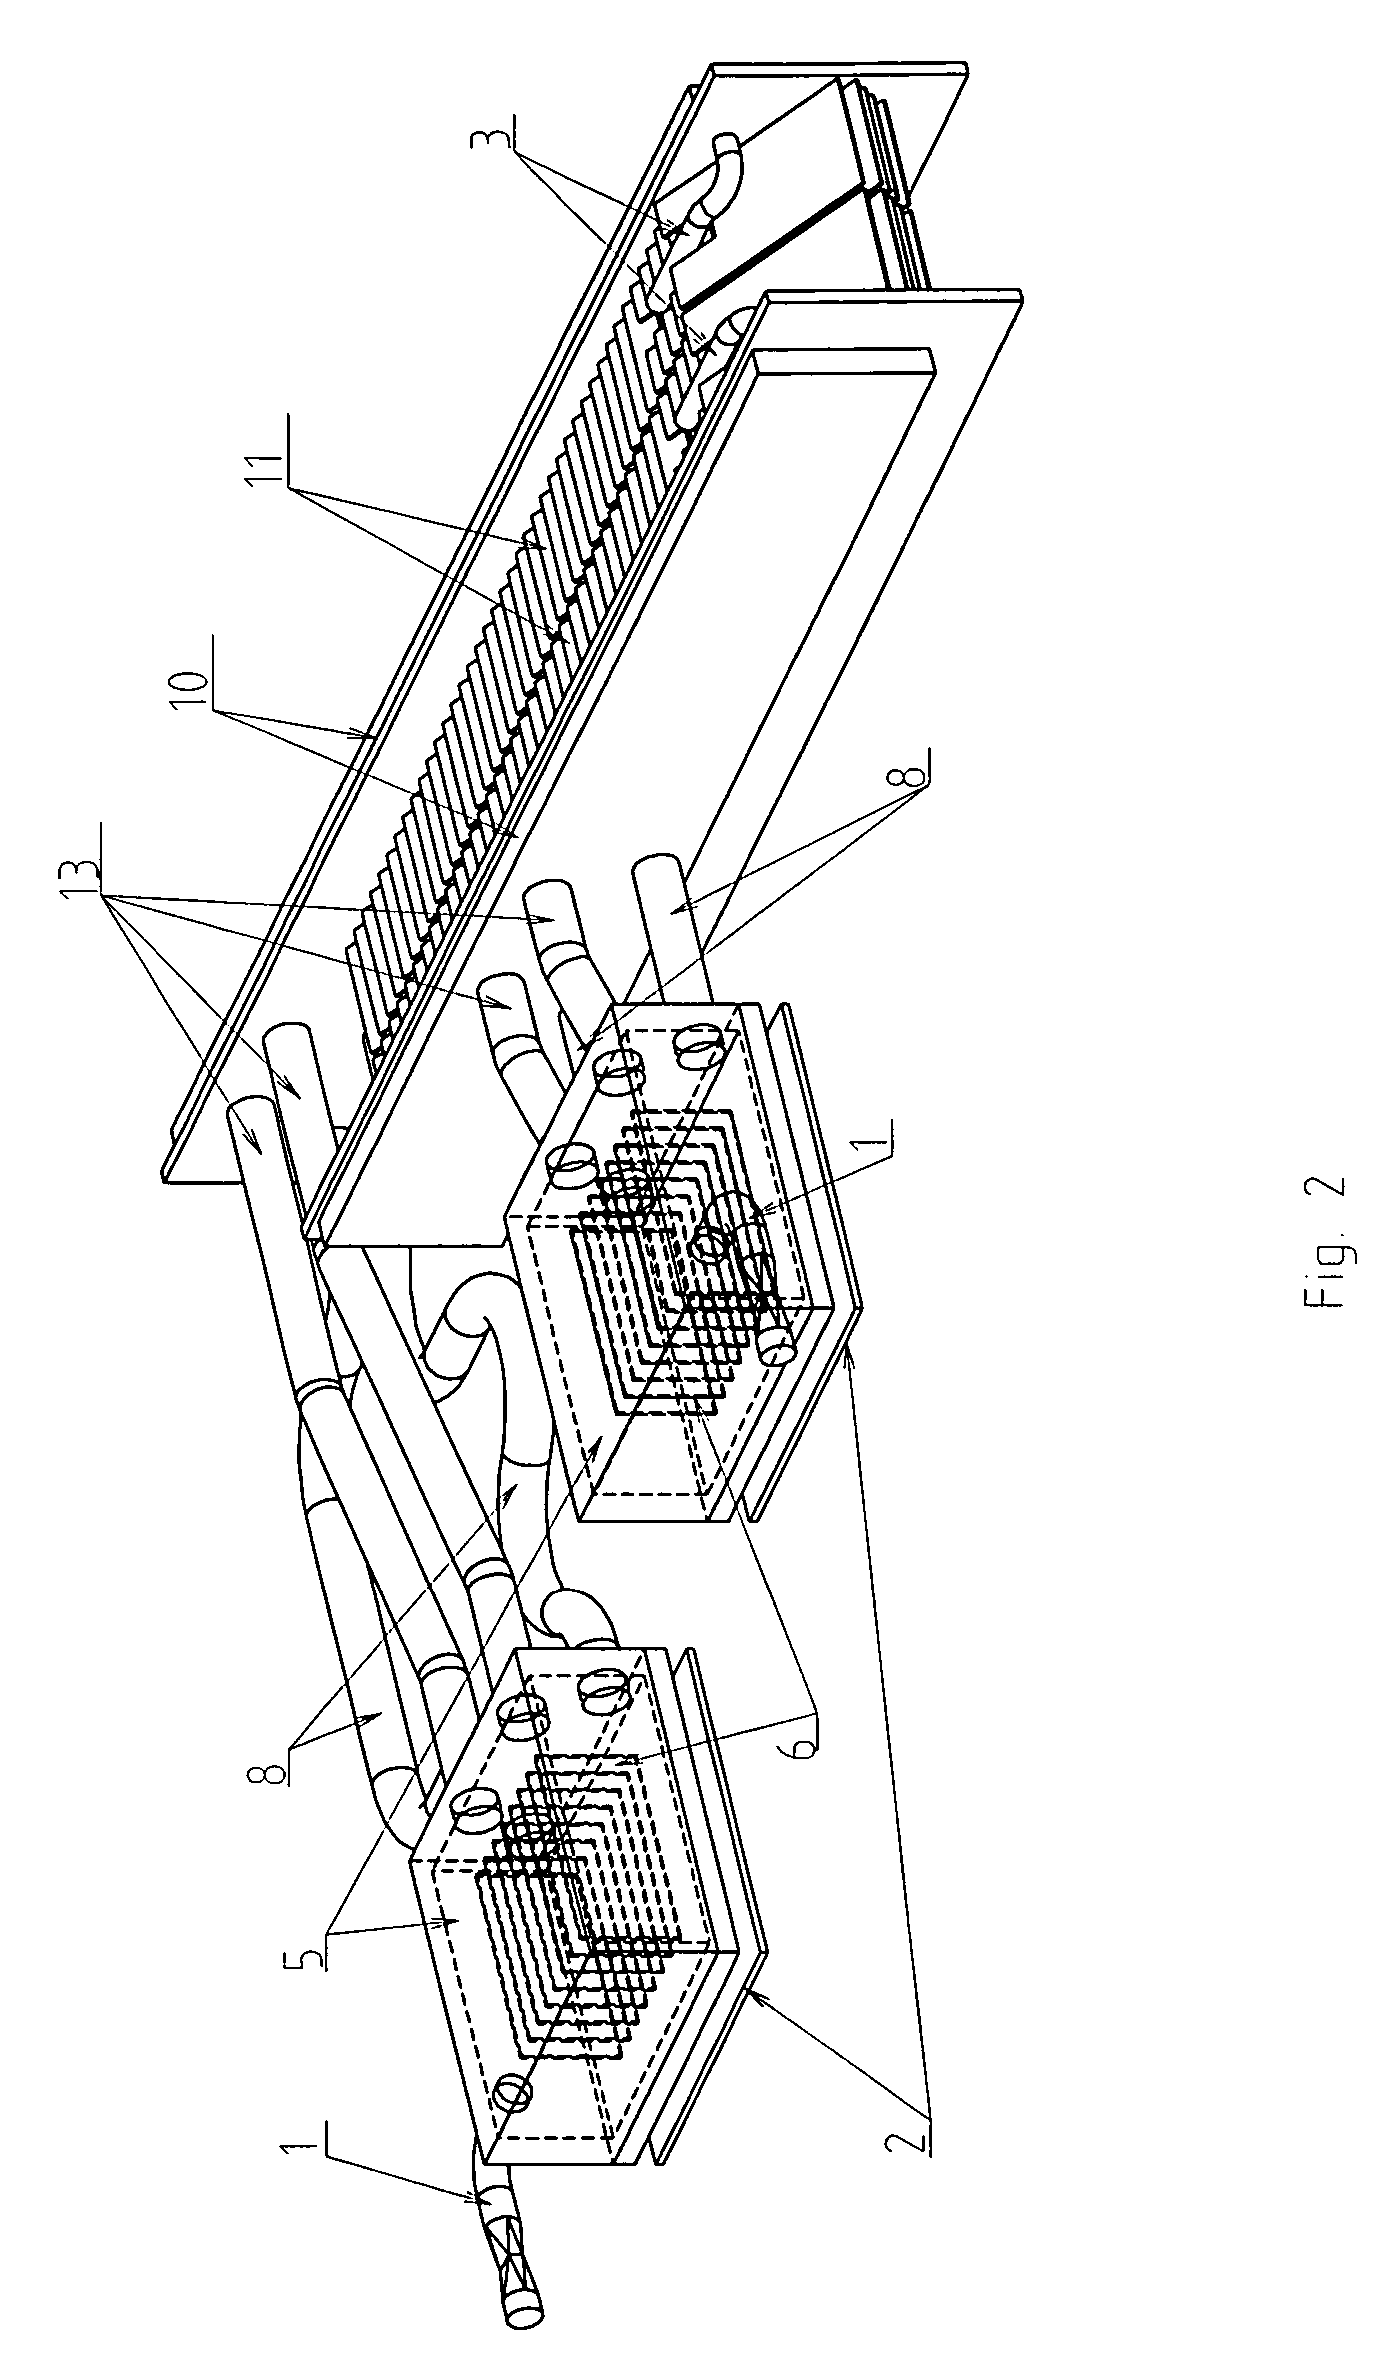 Low-profile thermosyphon-based cooling system for computers and other electronic devices